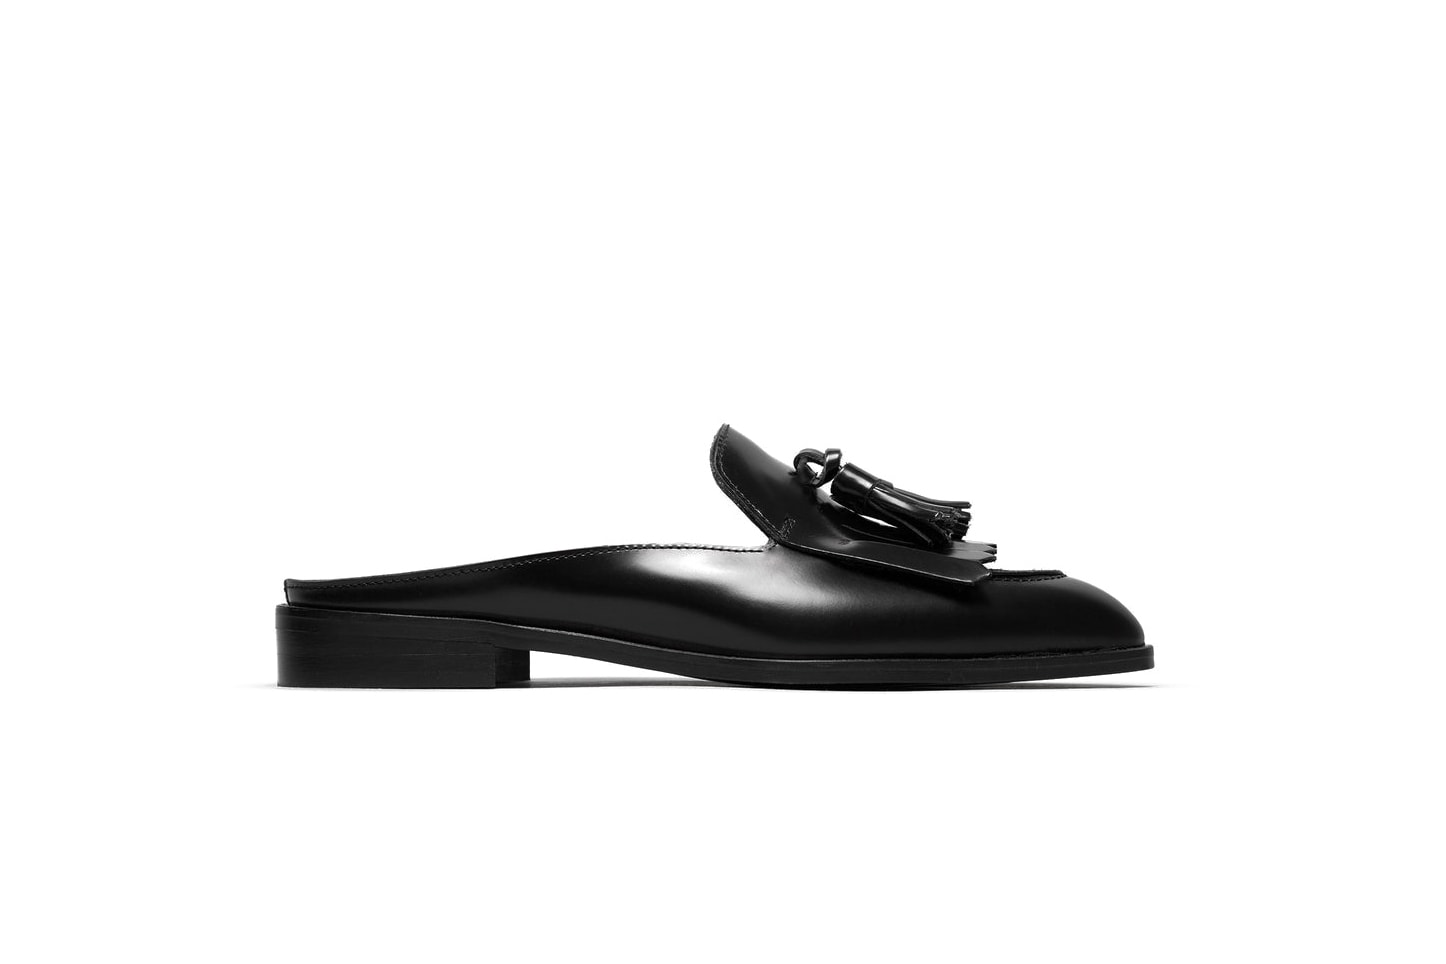 Everlane Classic Leather Mules Black Burgundy White Loafers Slippers Shoes